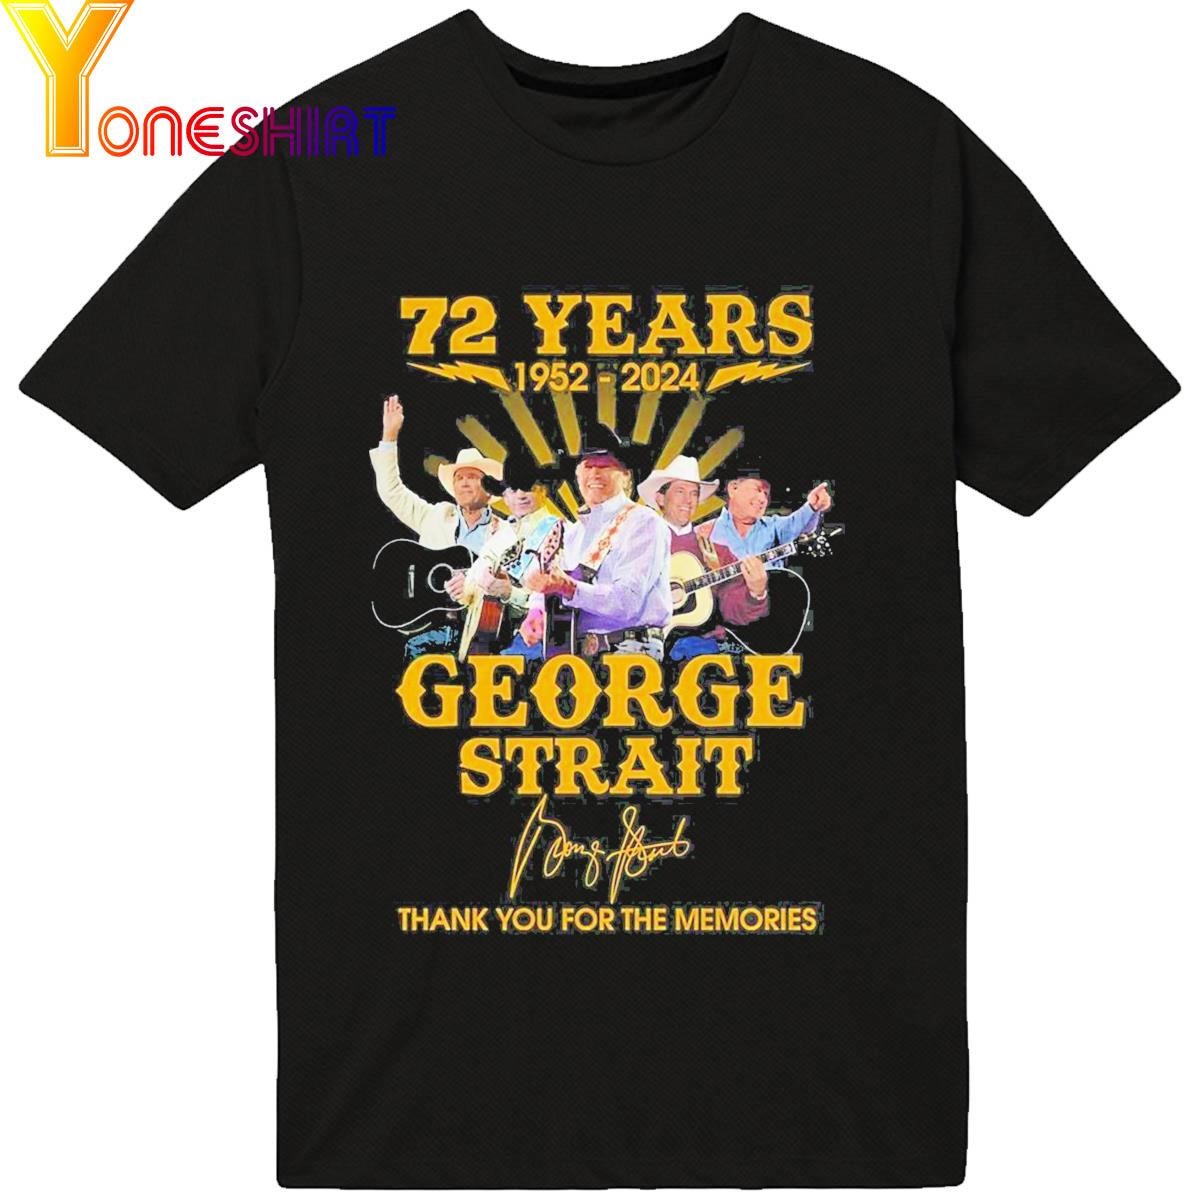 72 Years 1952 – 2024 George Strait Thank You For The Memories Signature Shirt